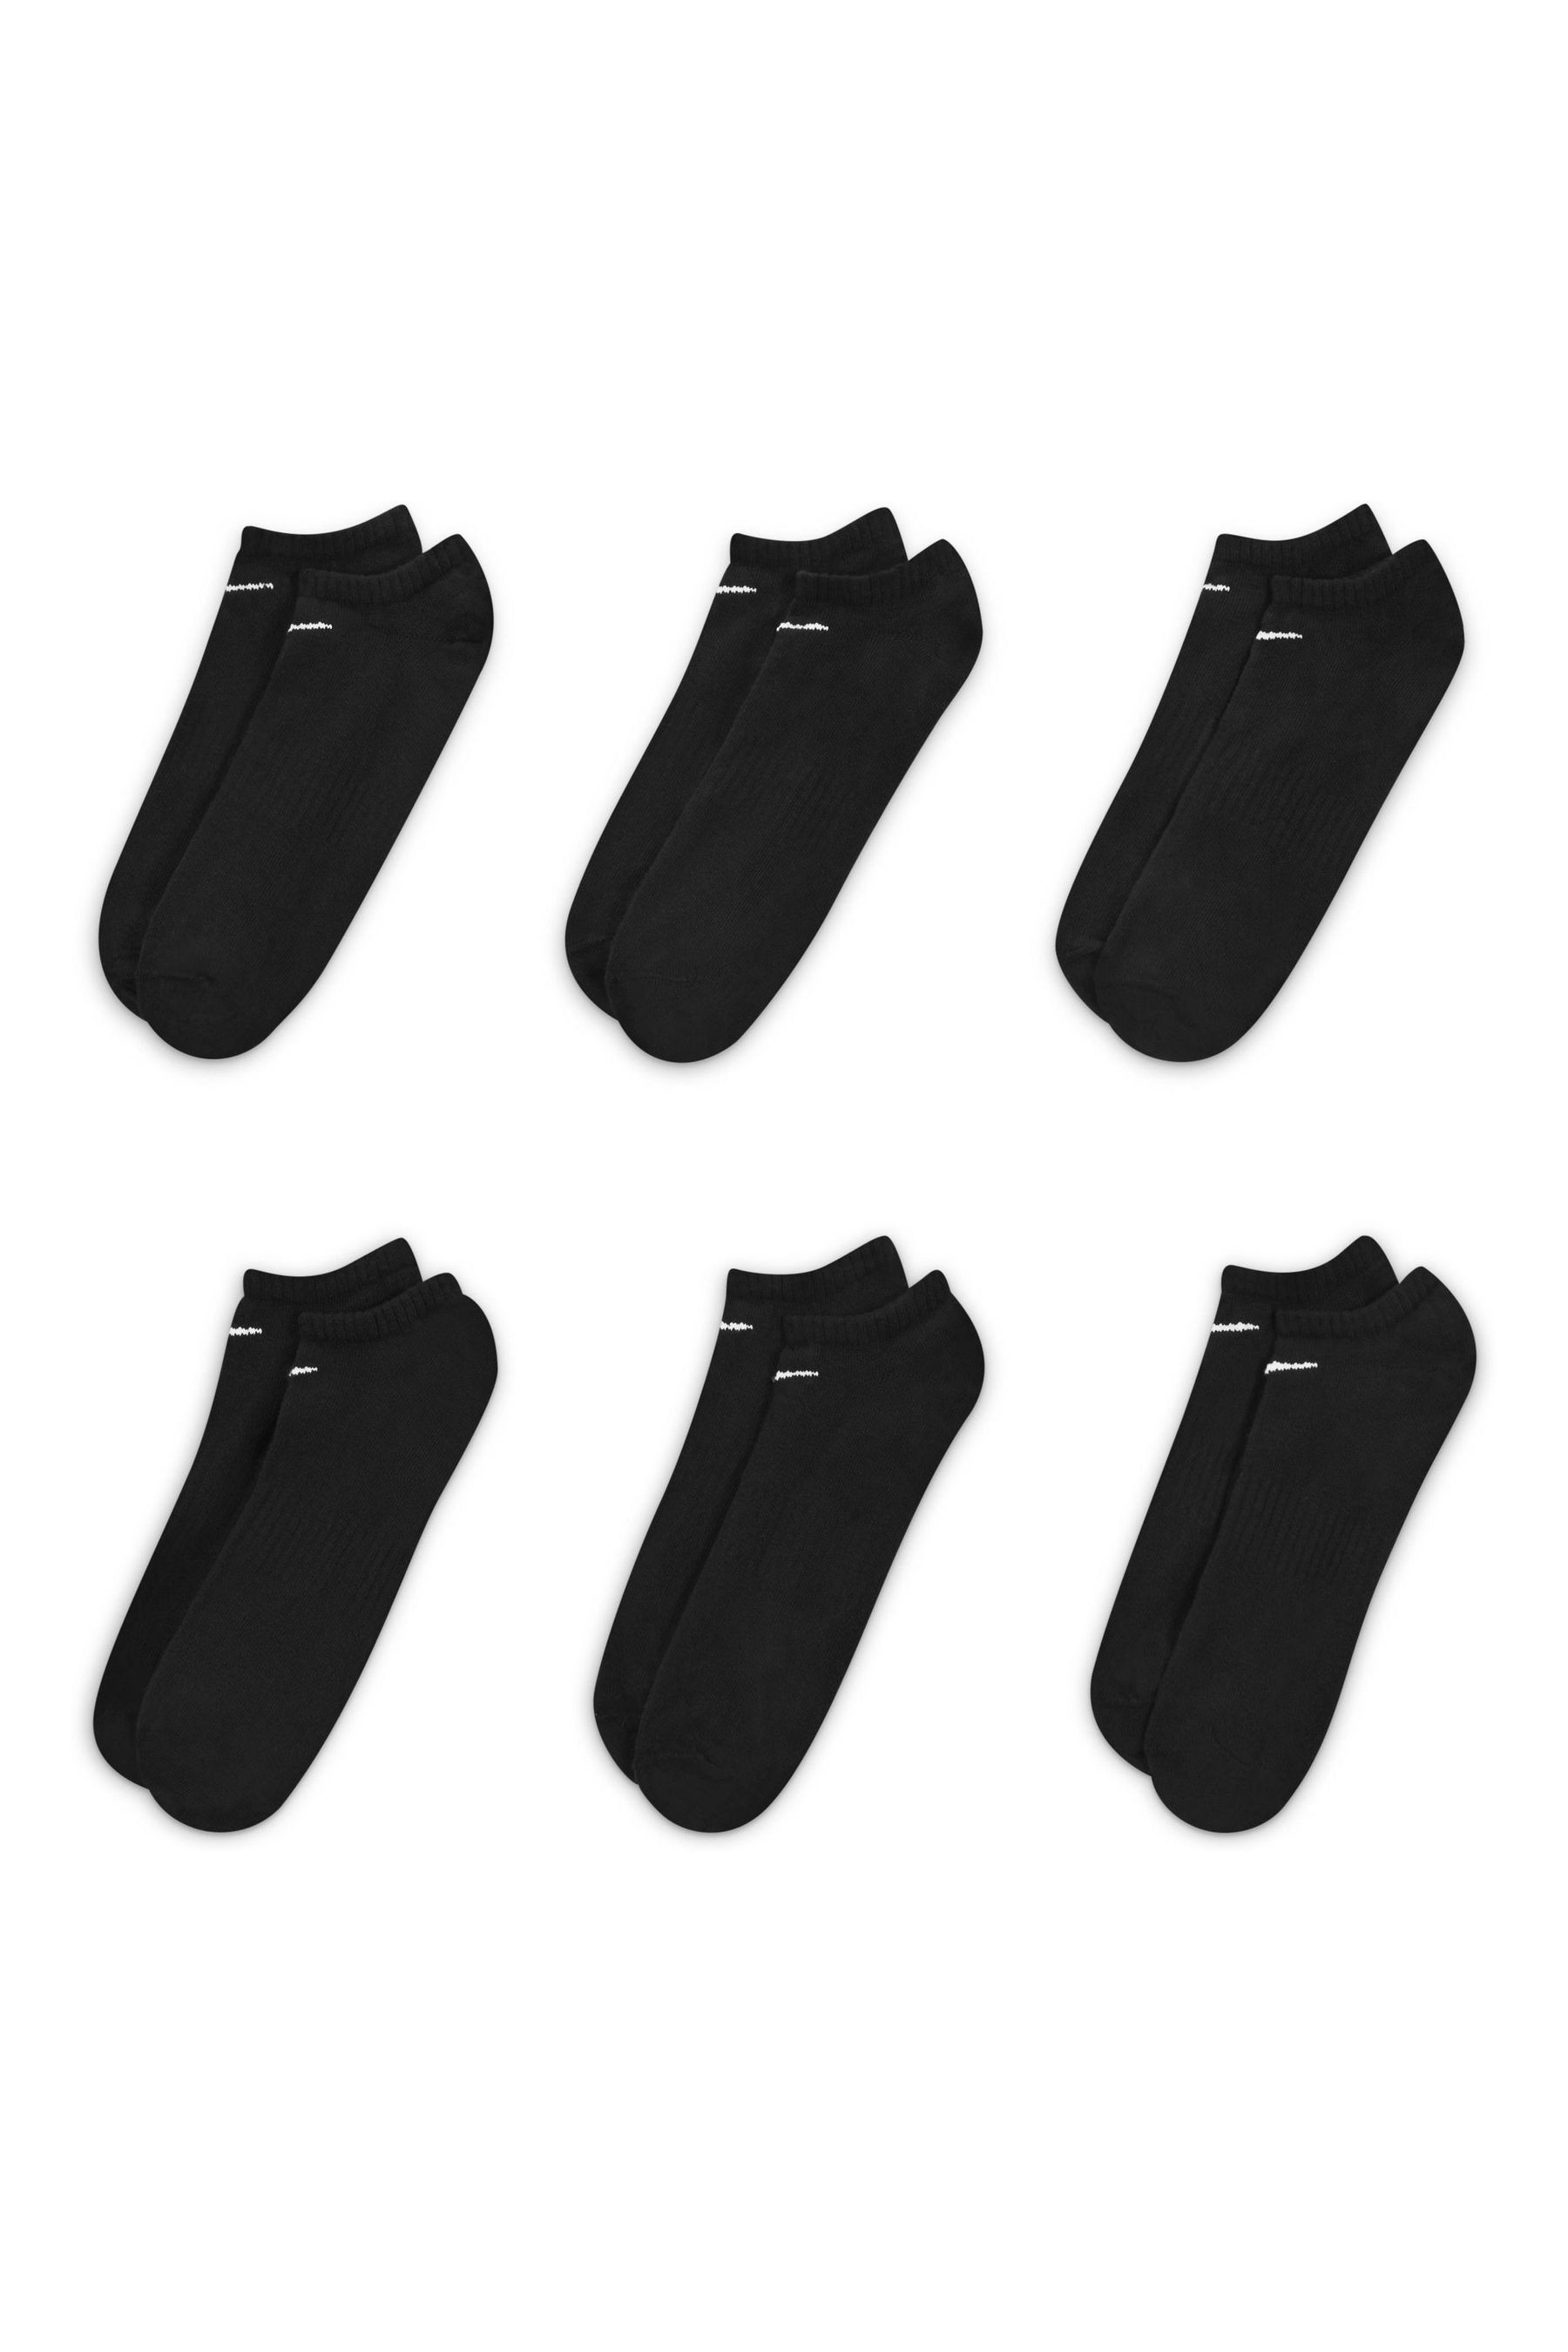 Buy Nike Black Lightweight Invisible Socks Six Pack from the Next UK ...